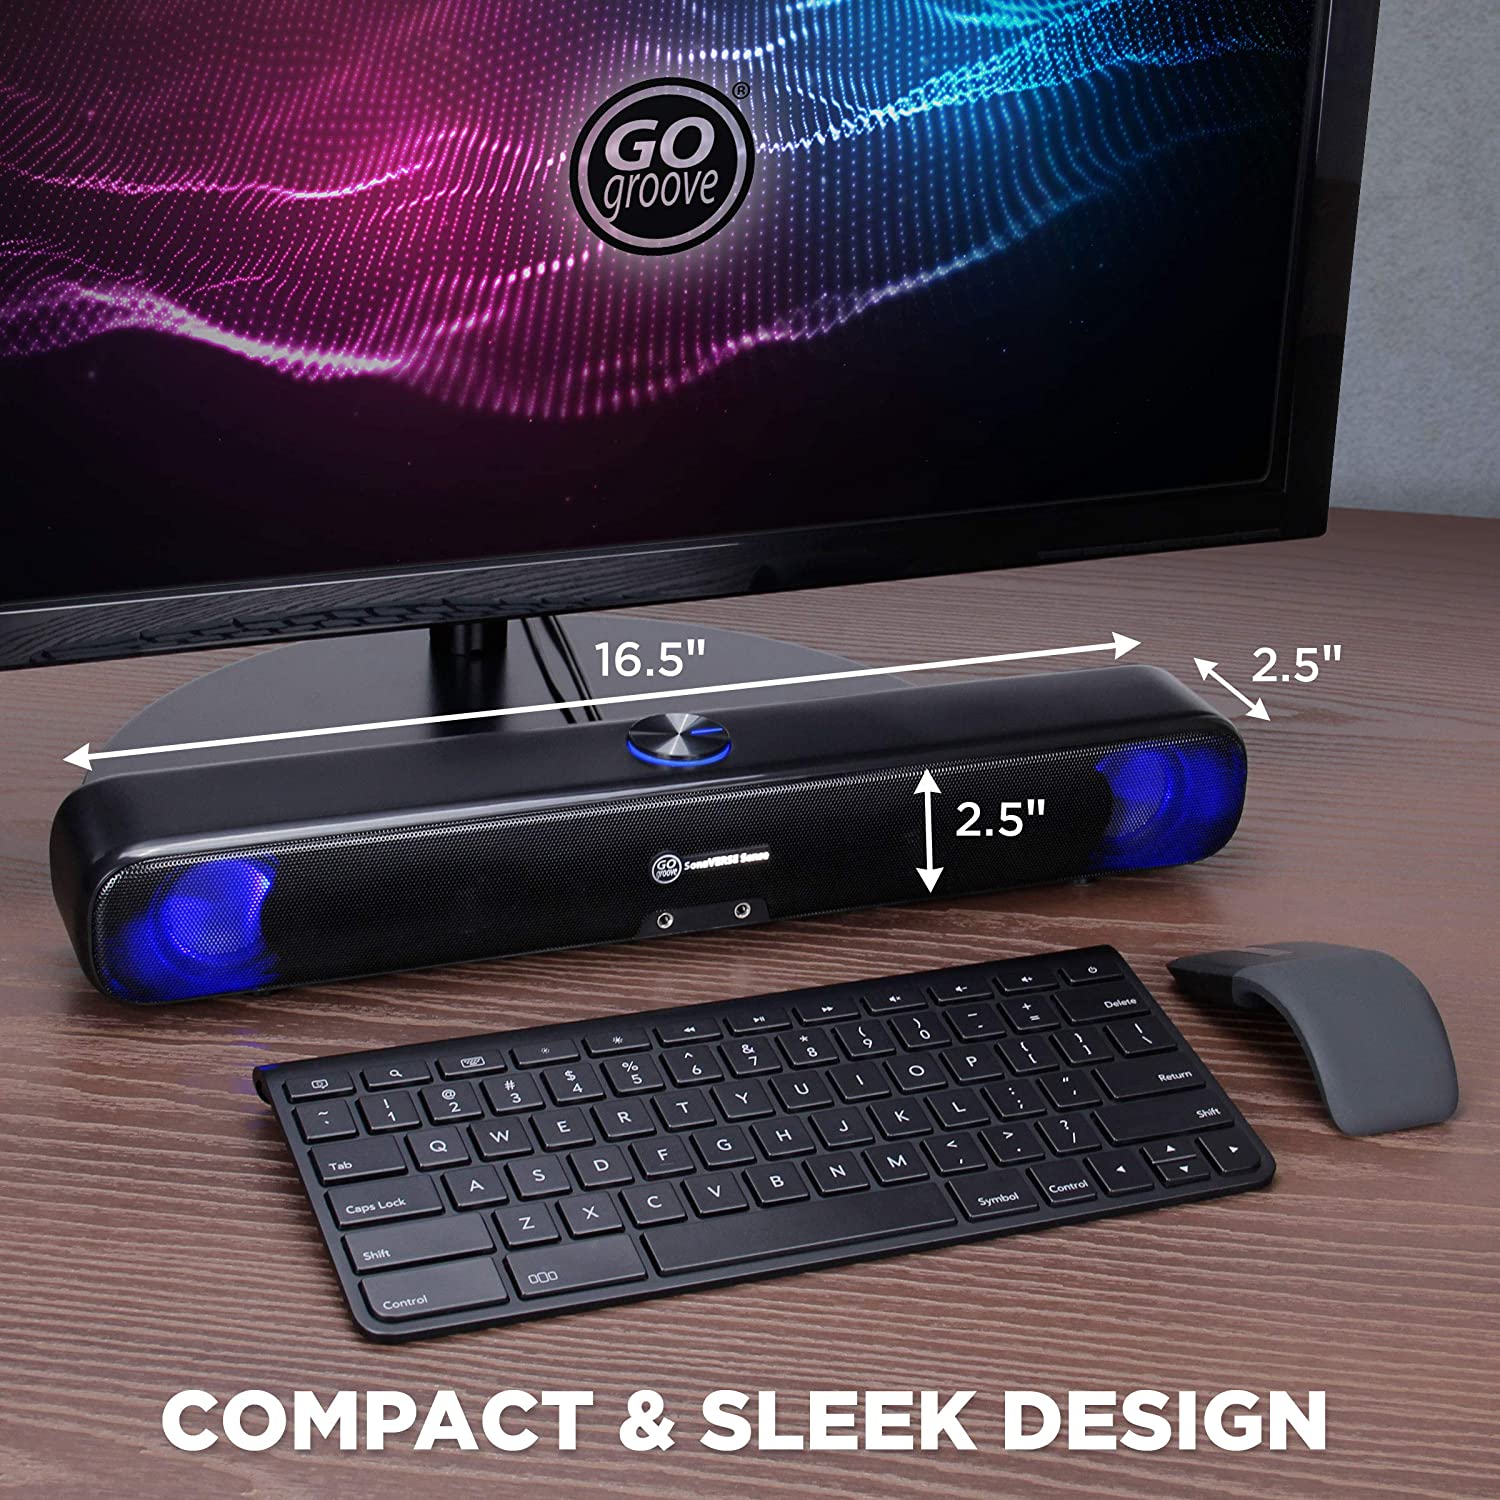 GOgroove Computer Speaker LED Sound Bar - SonaVERSE Sense USB Powered Desktop Computer Speaker for PC, Laptop with Glowing LED Lights, Stereo Drivers, Headphone and Microphone Ports, Wired AUX Input - image 2 of 9